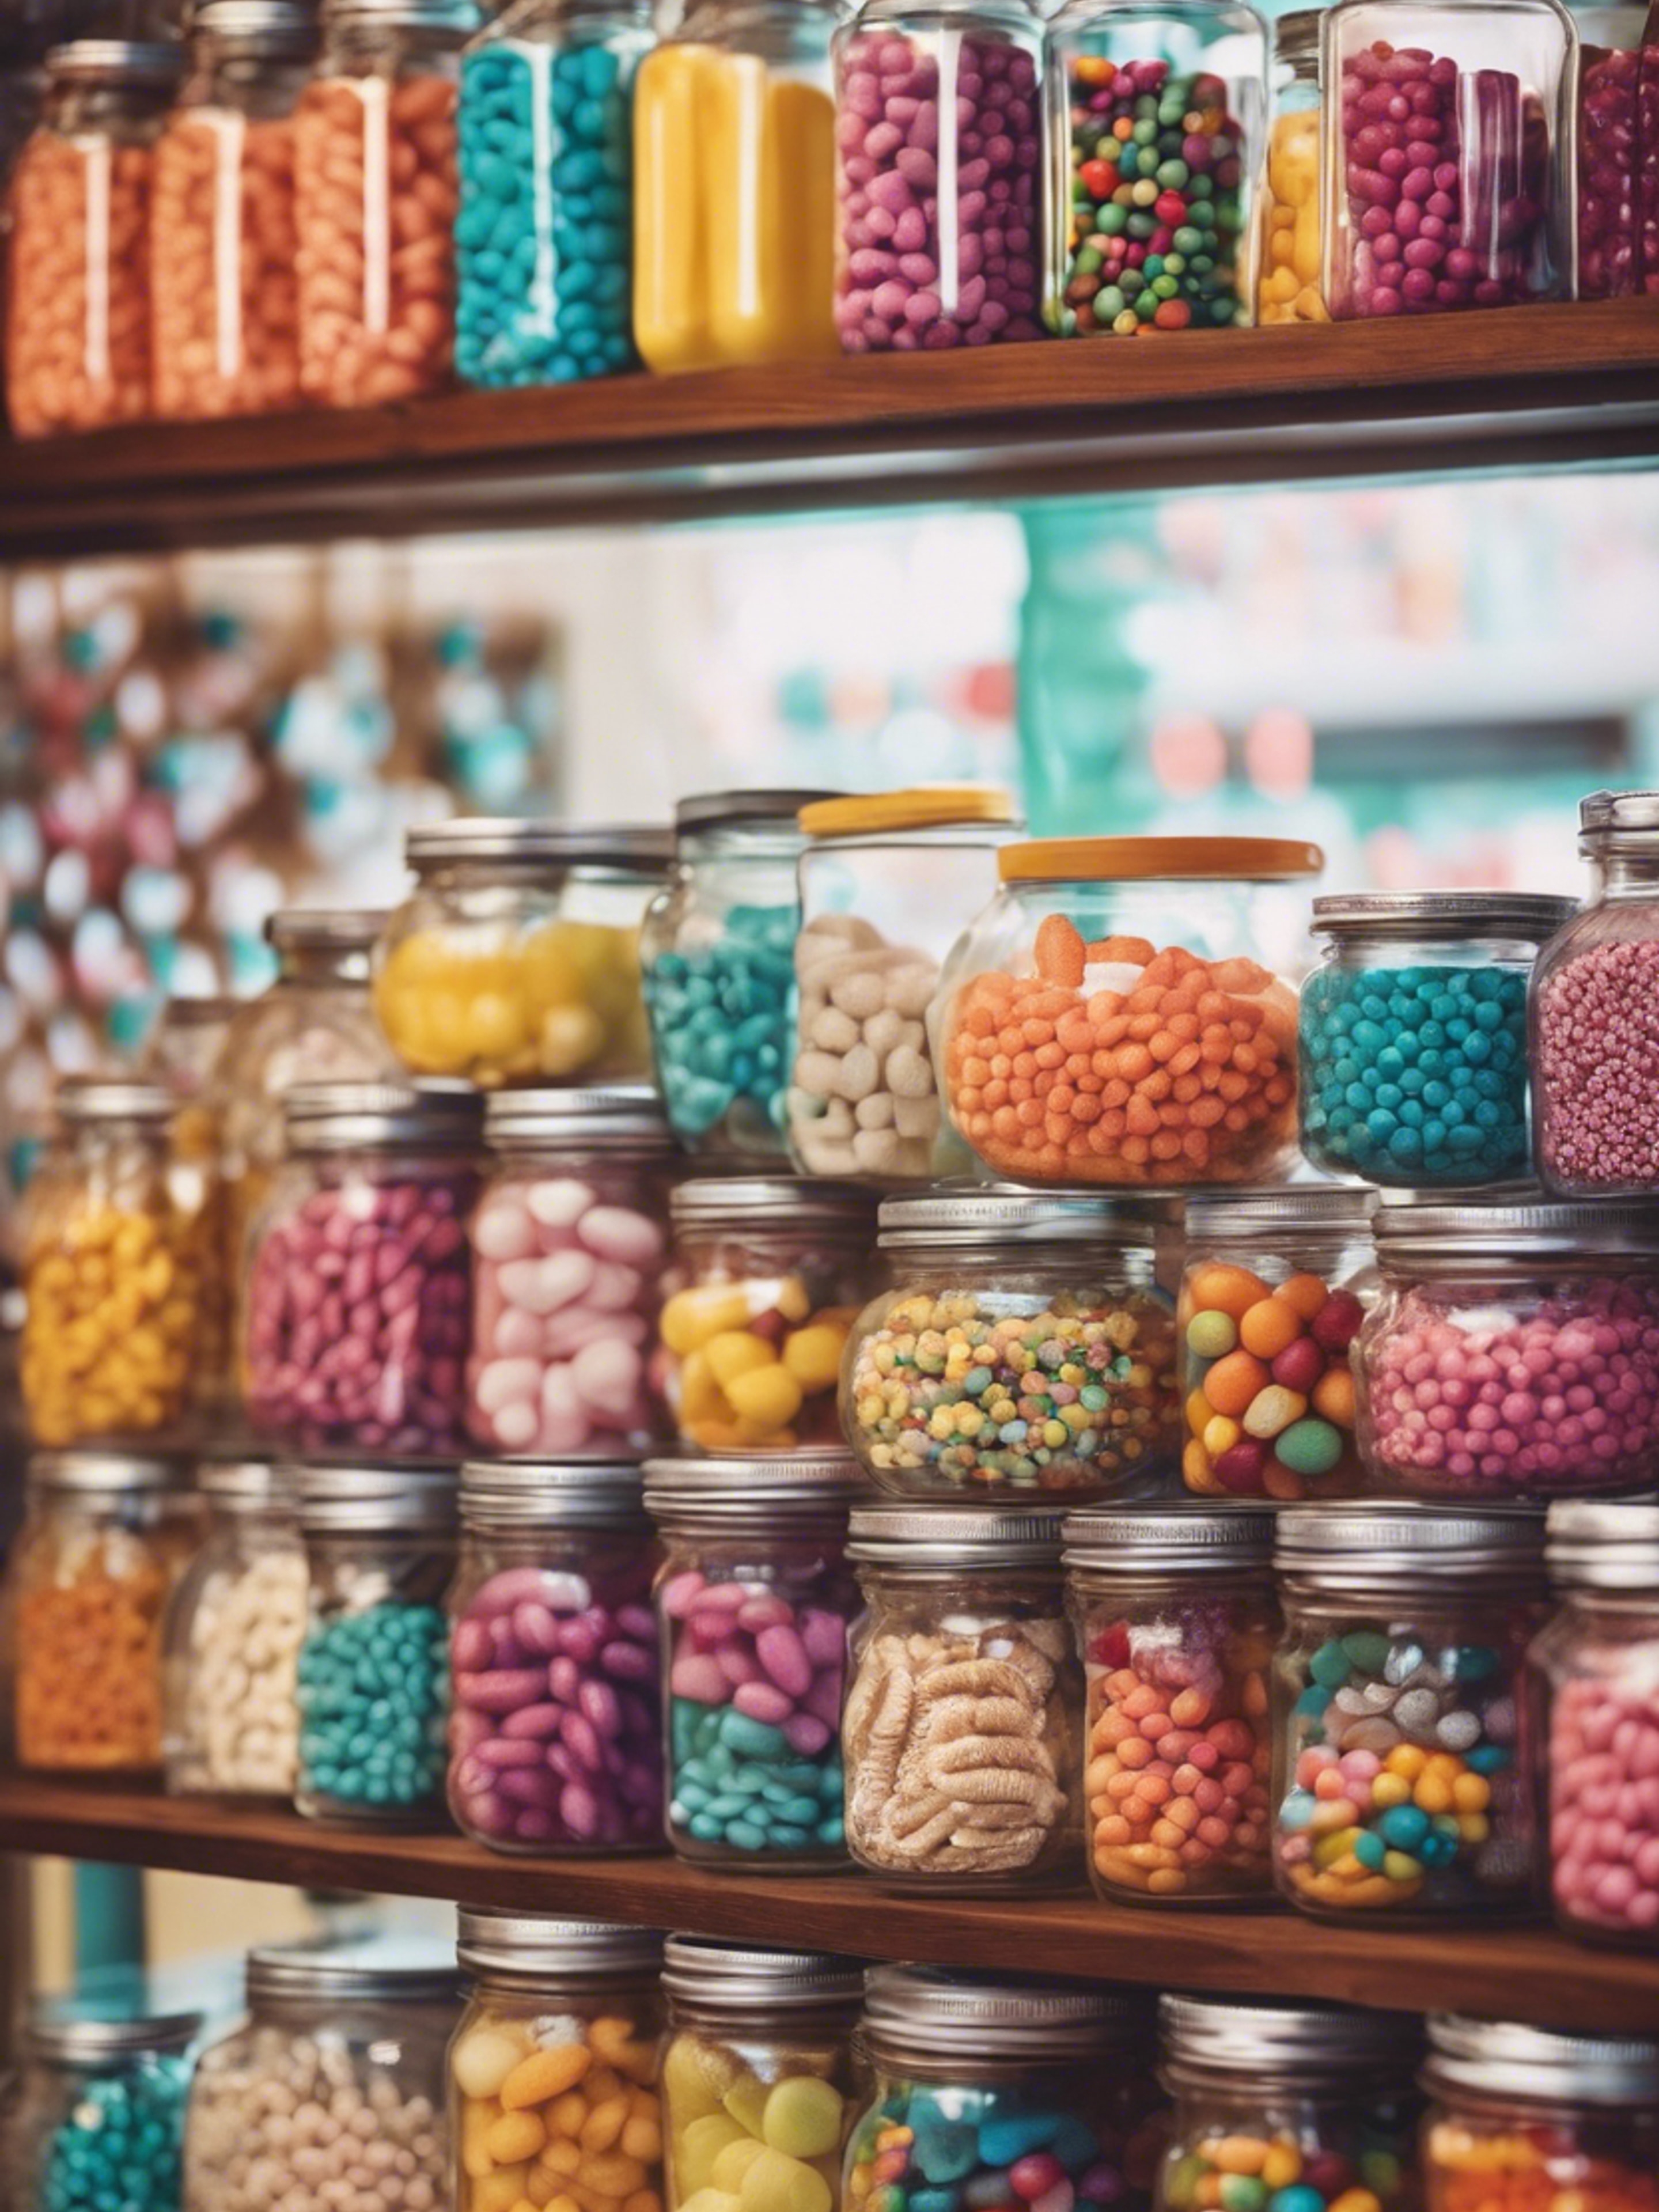 Retro candy store filled with jars of colorful treats. Behang[53bdbe1ef5c6451abca1]